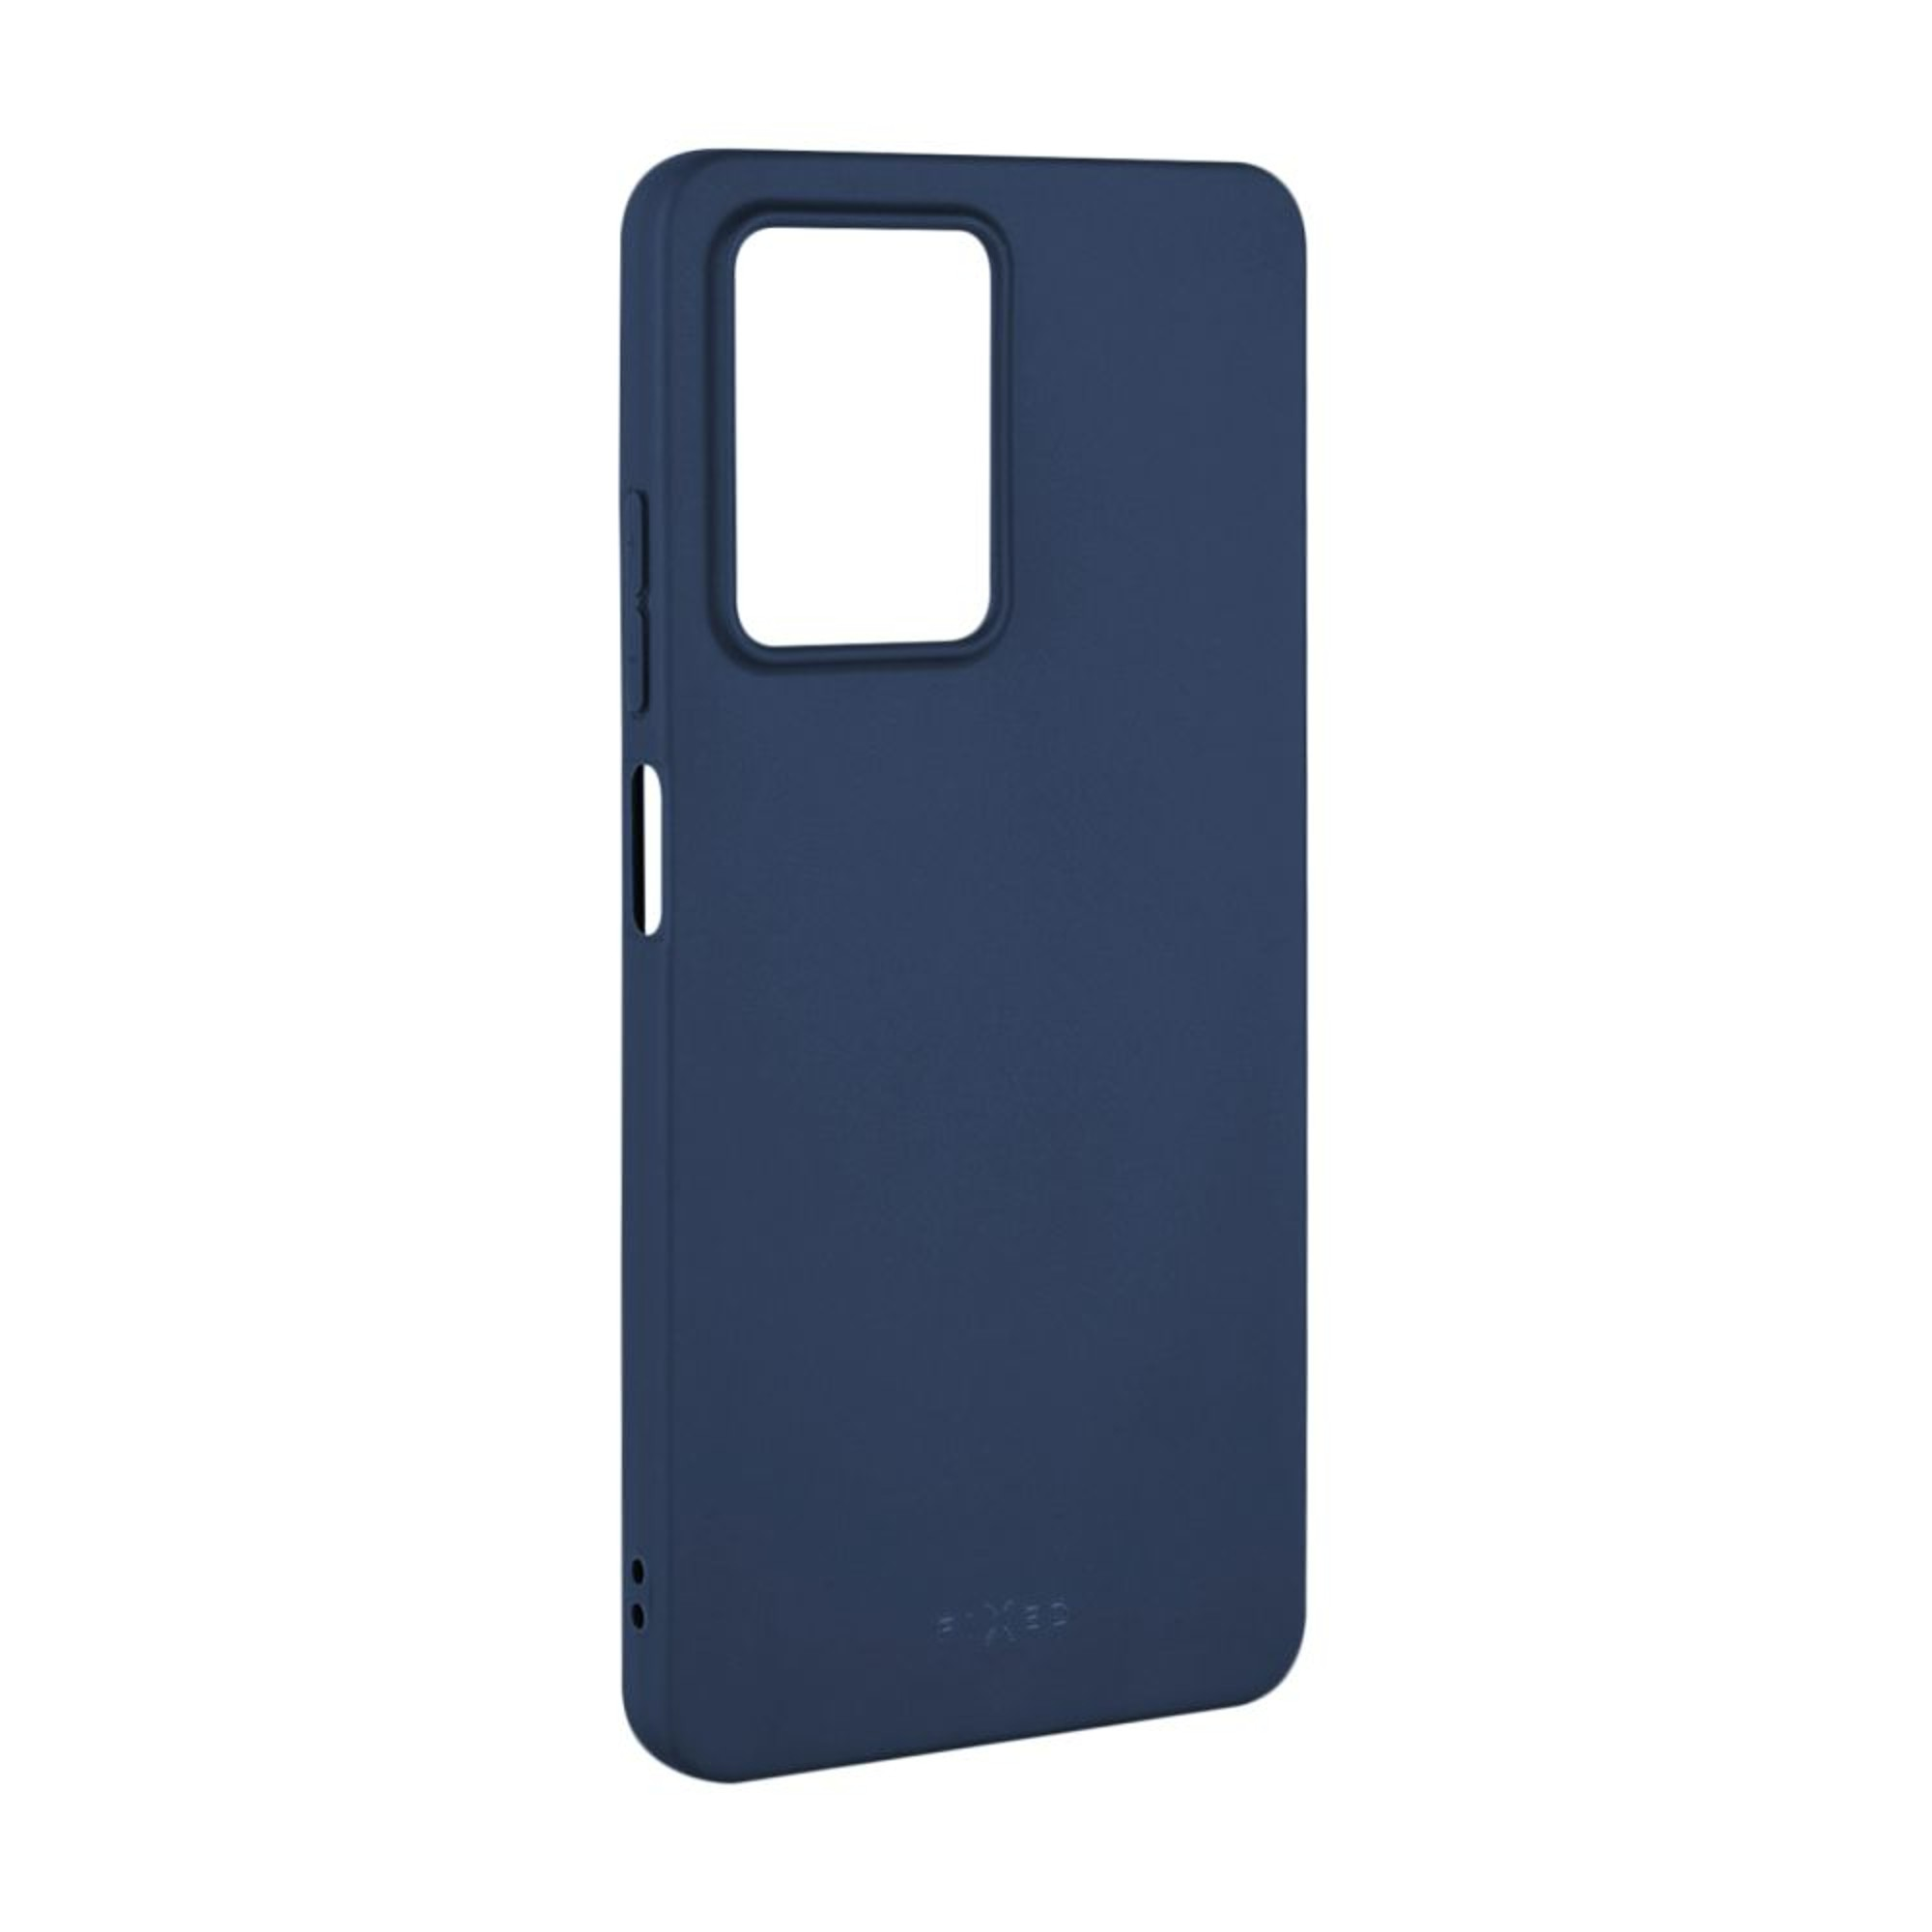 Backcover, FIXST-1101-BL, Story Soft-Touch Pro Xiaomi, FIXED X5 5G, Blau POCO